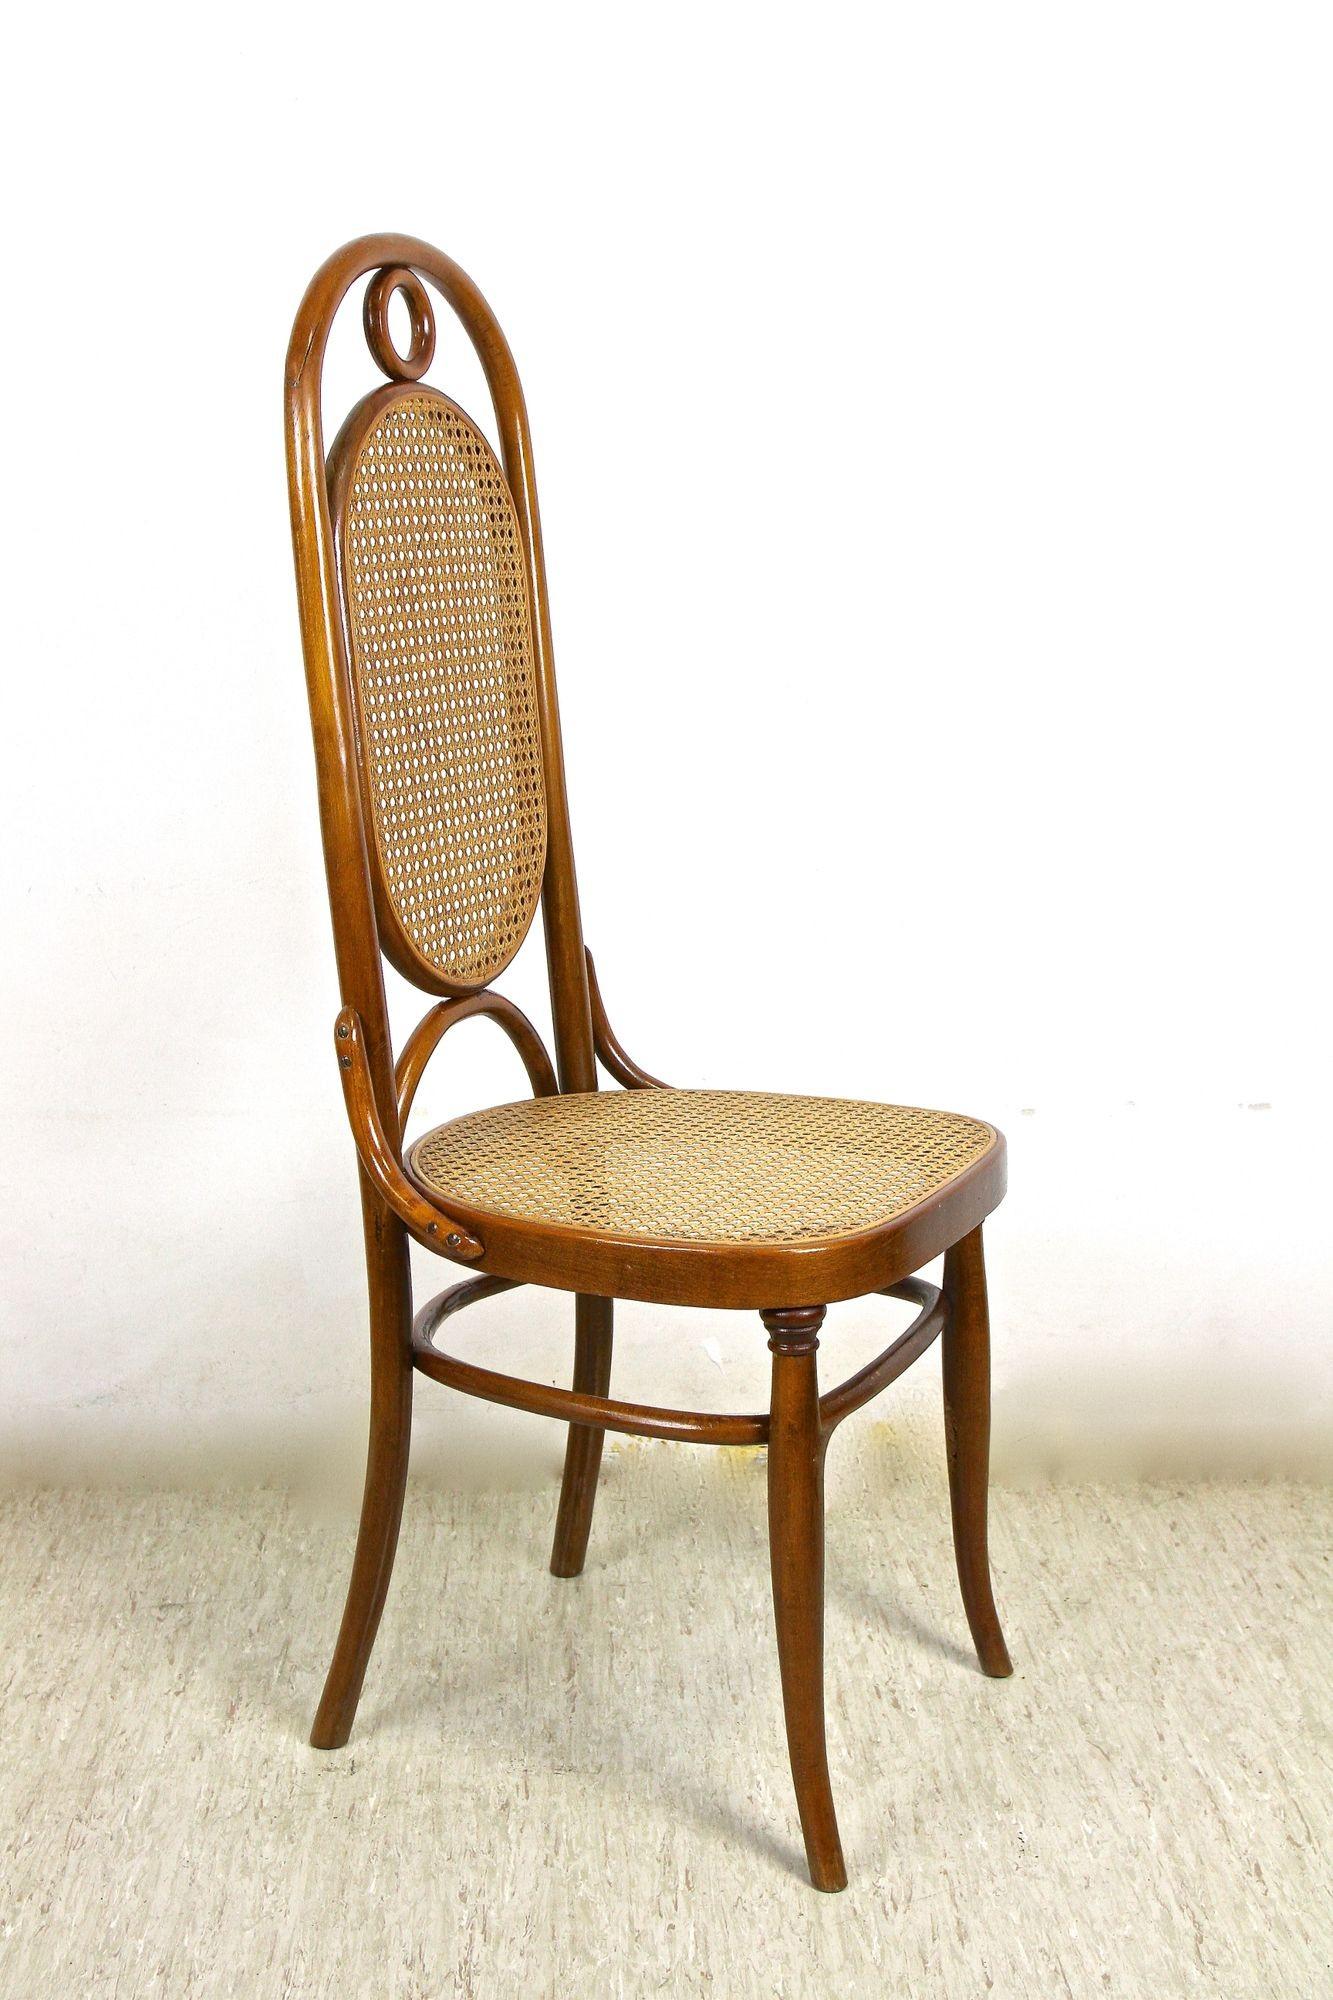 Austrian Thonet Bentwood Chairs with Table, Art Nouveau Seating Set, Austria, circa 1915 For Sale